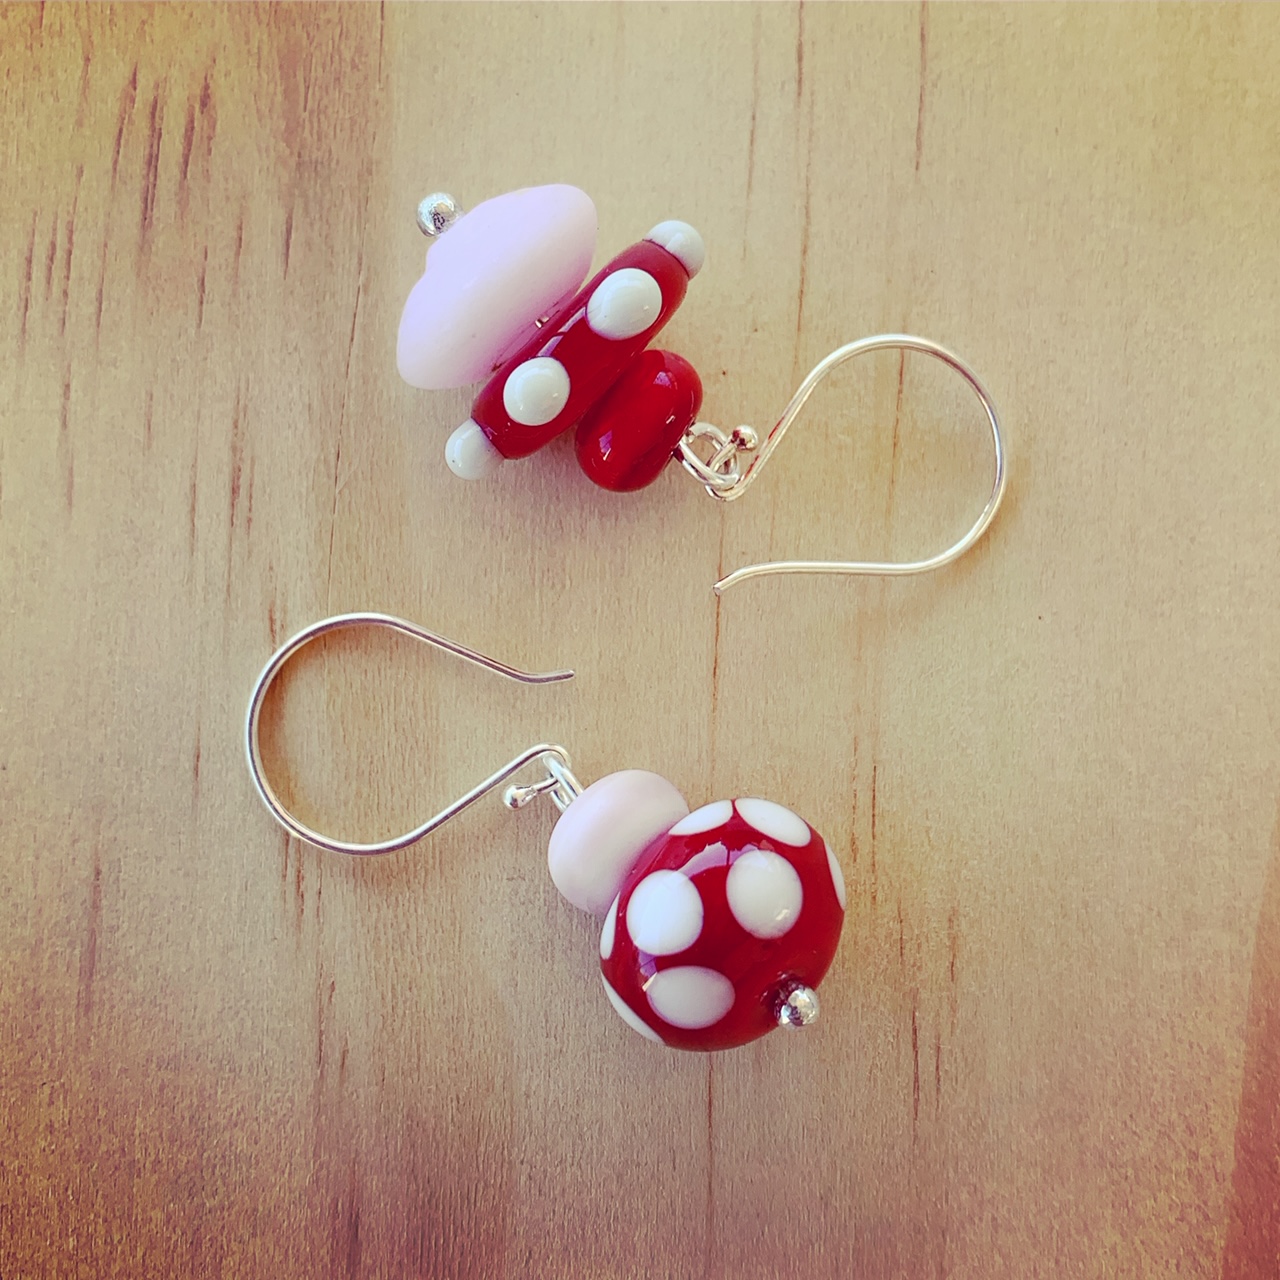 Red and Pink Mismatched Earrings